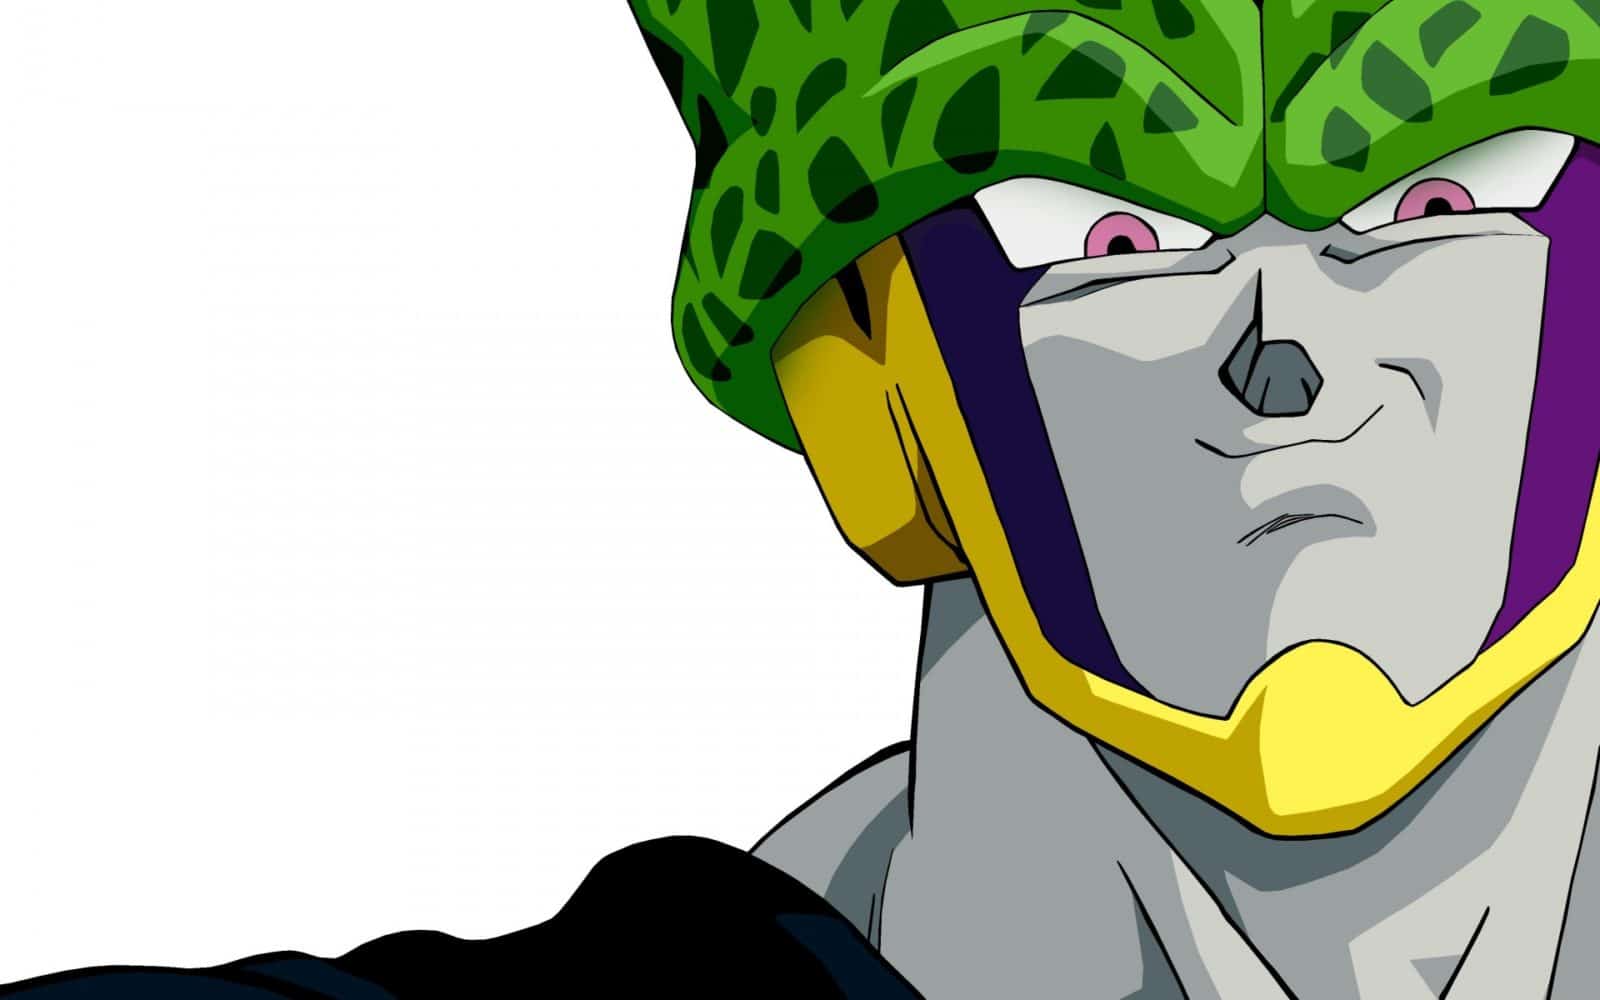 perfect cell